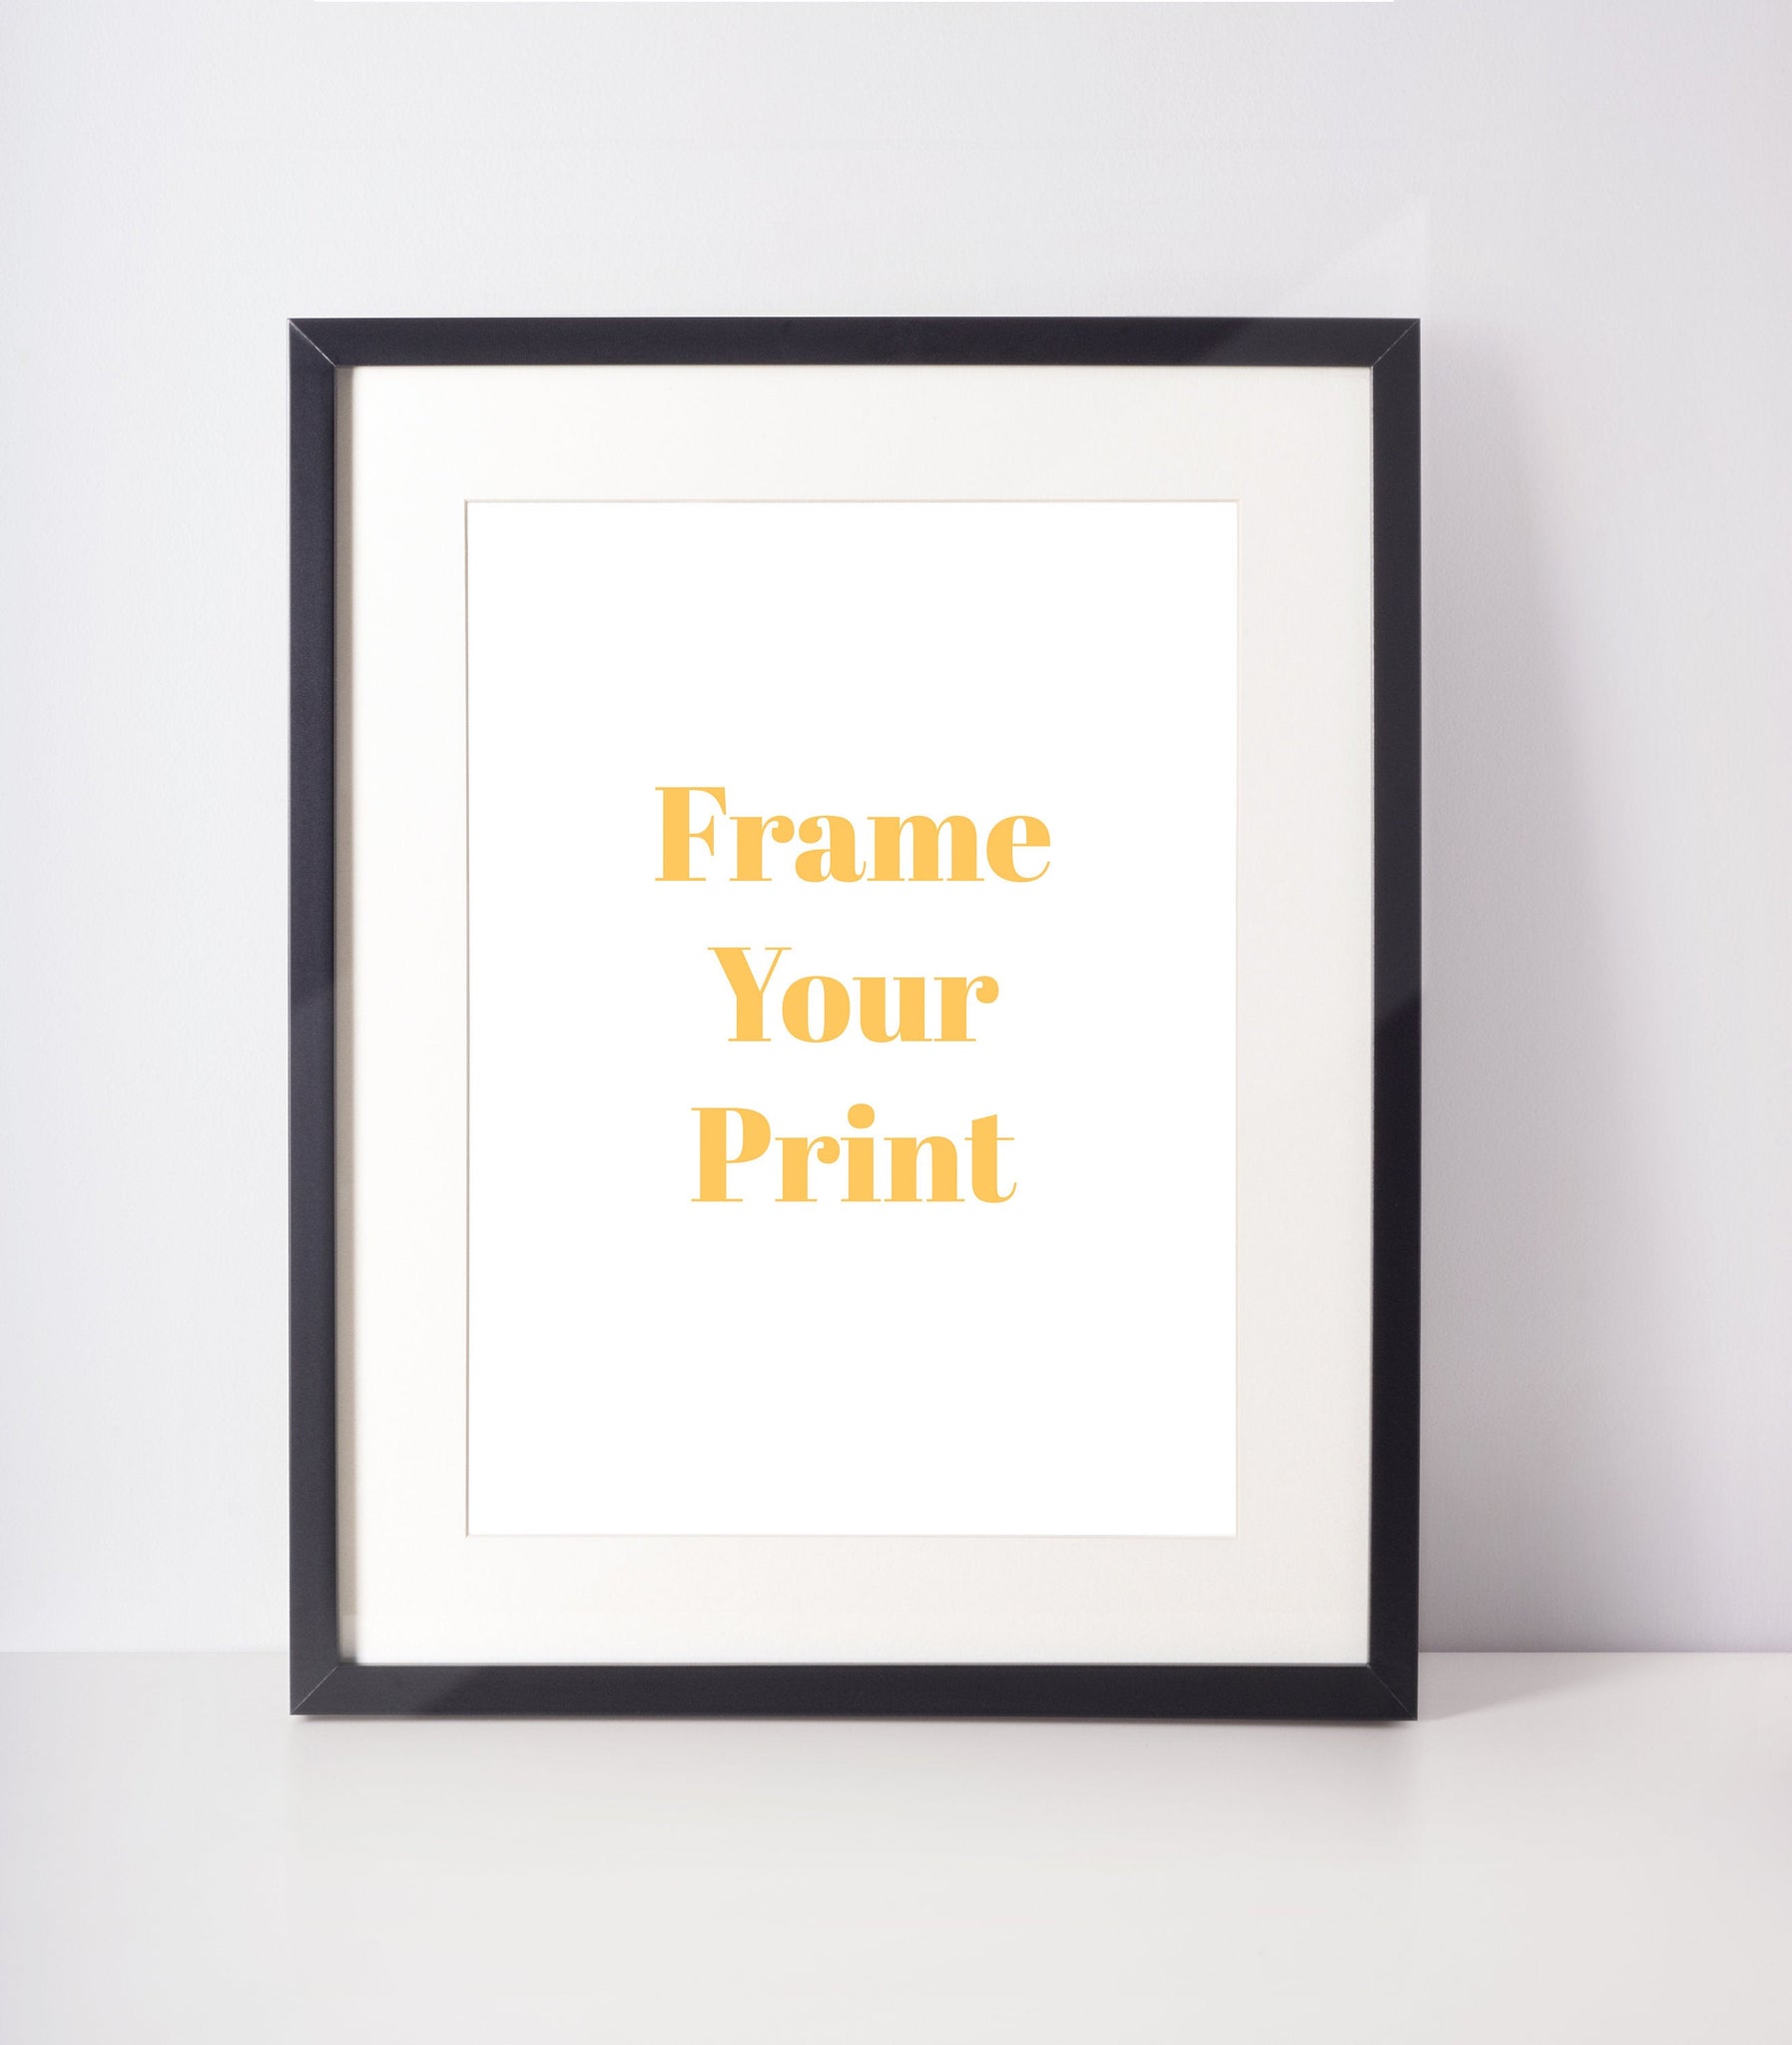 Frame Your Print Add-on Item